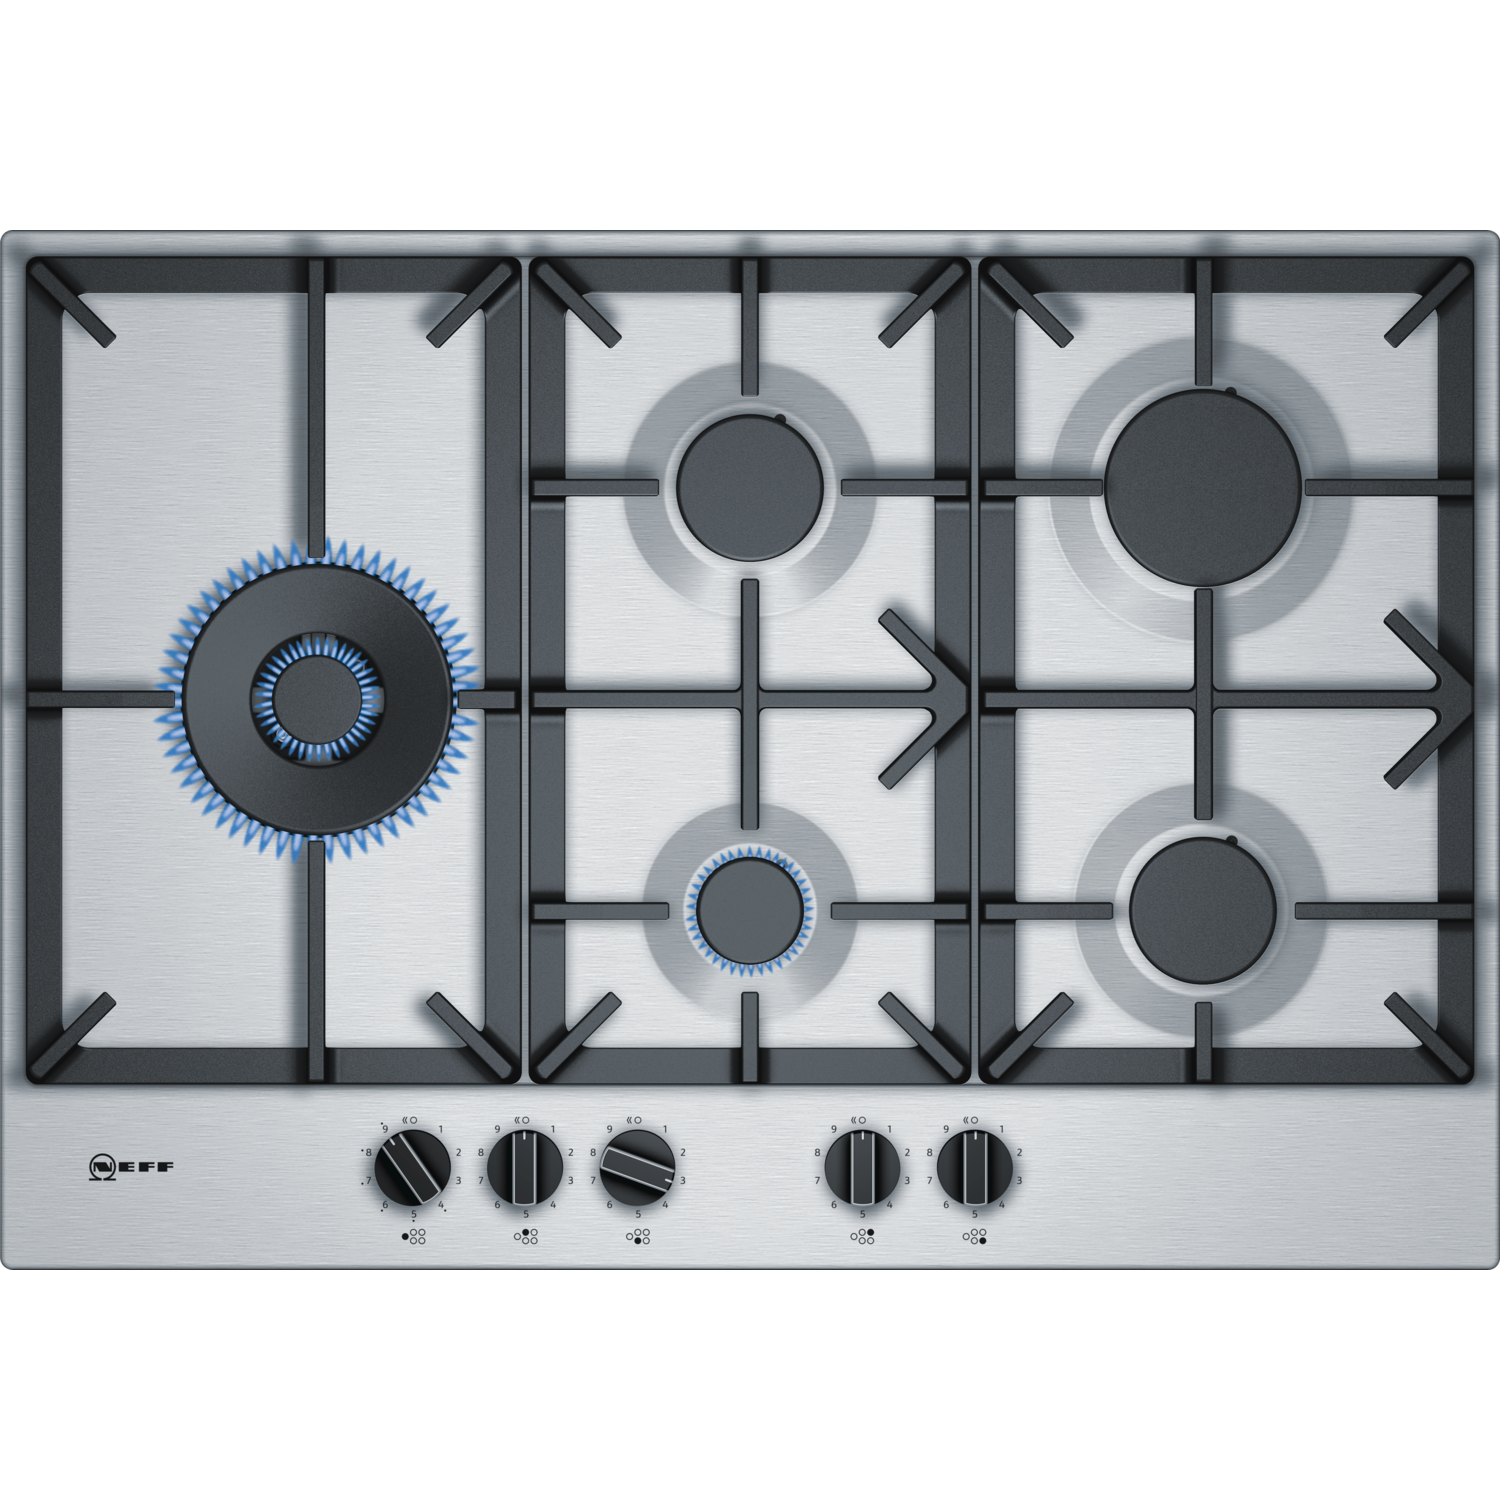 Refurbished Neff N70 T27DS79N0 75cm 5 Burner Gas Hob with Cast Iron Pan Stands Stainless Steel